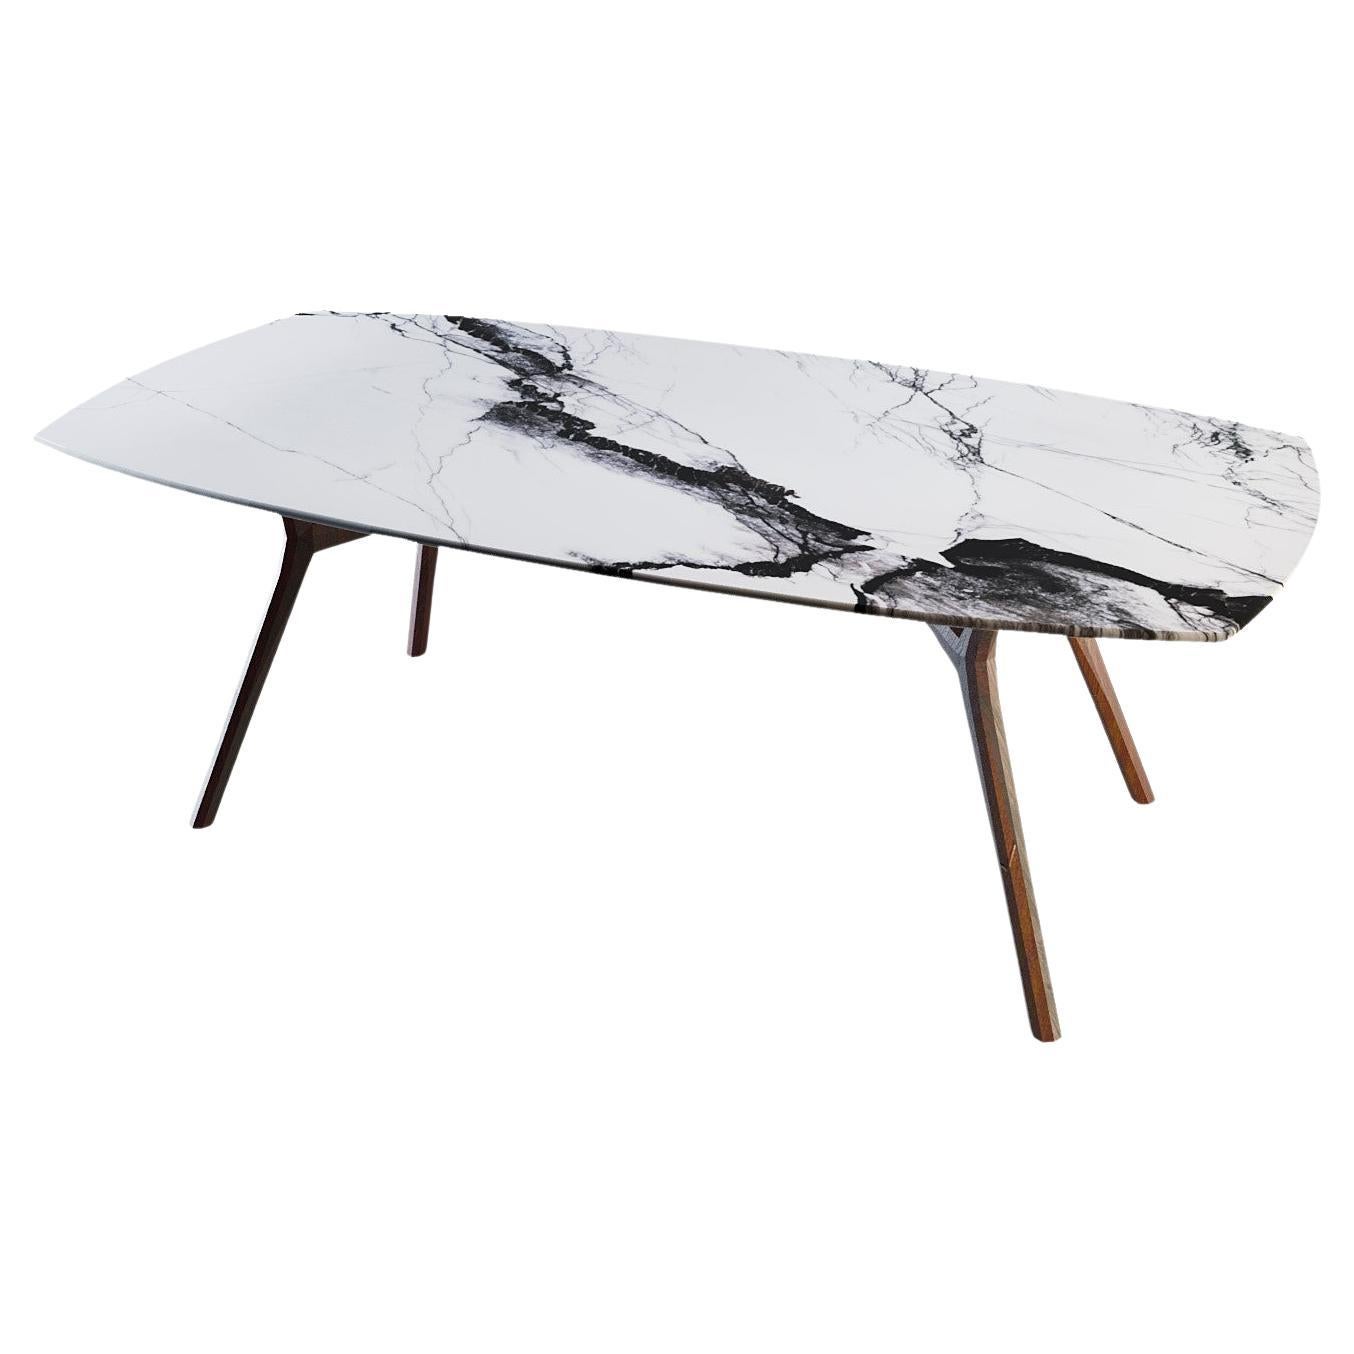 NORDST POUL Dining Table, Italian White Montain Marble, Danish Modern Design For Sale